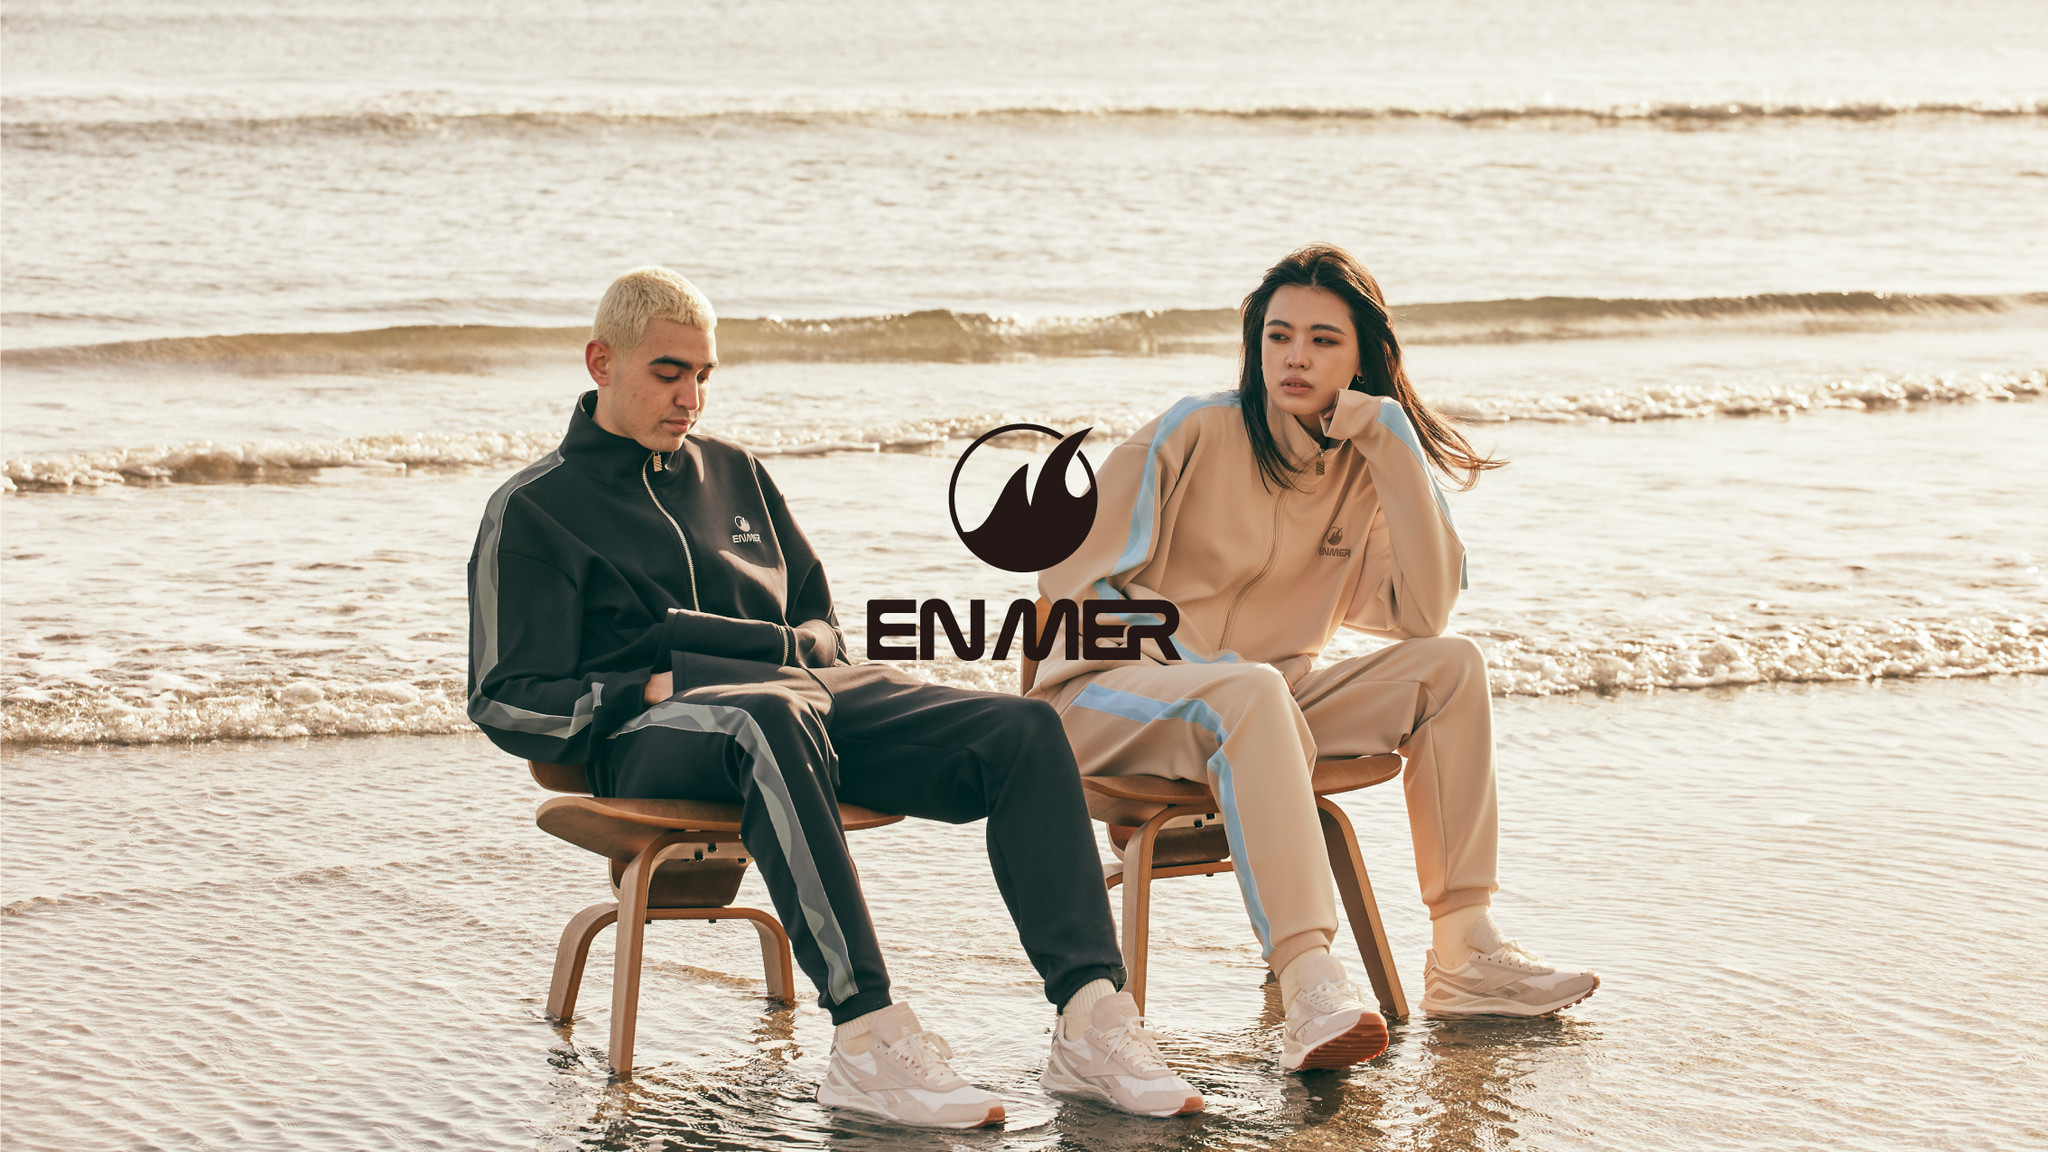 MFC STORE x ENMER エンメール 朝倉海